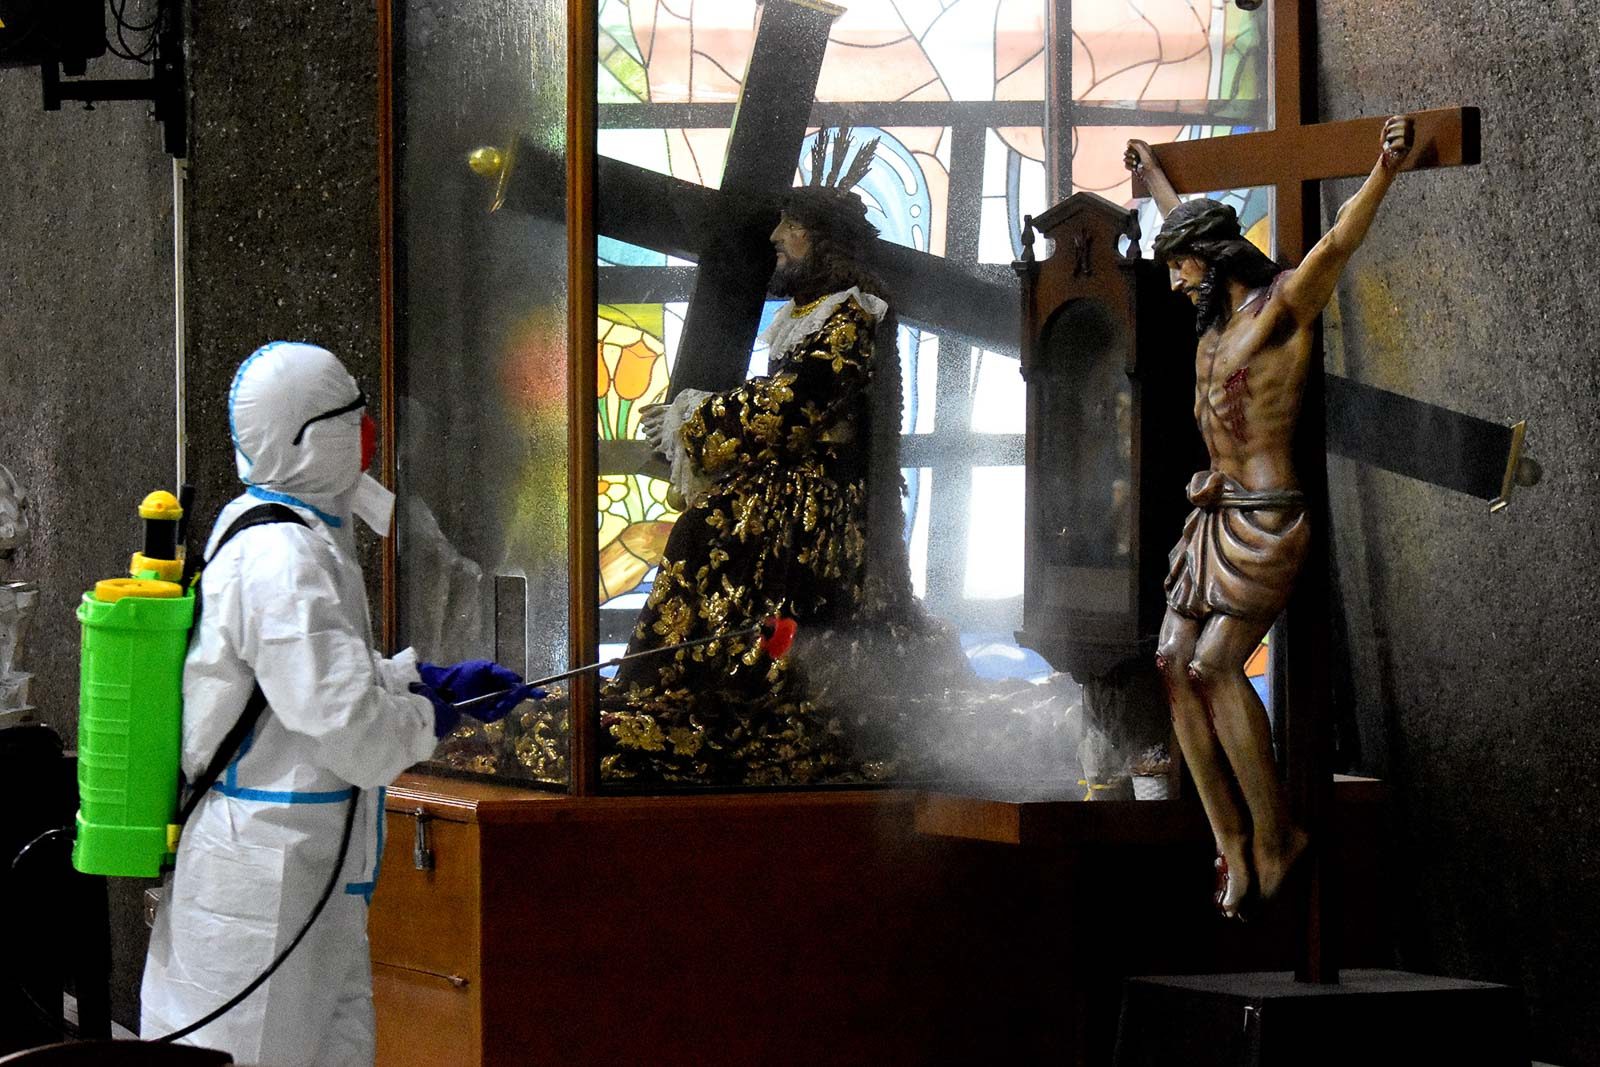 DISINFECTION. Workers disinfect a Catholic church in Quezon City on May 19, 2020, as they prepare for the resumption of public Masses once coronavirus measures are eased. Photo by Angie de Silva/Rappler  